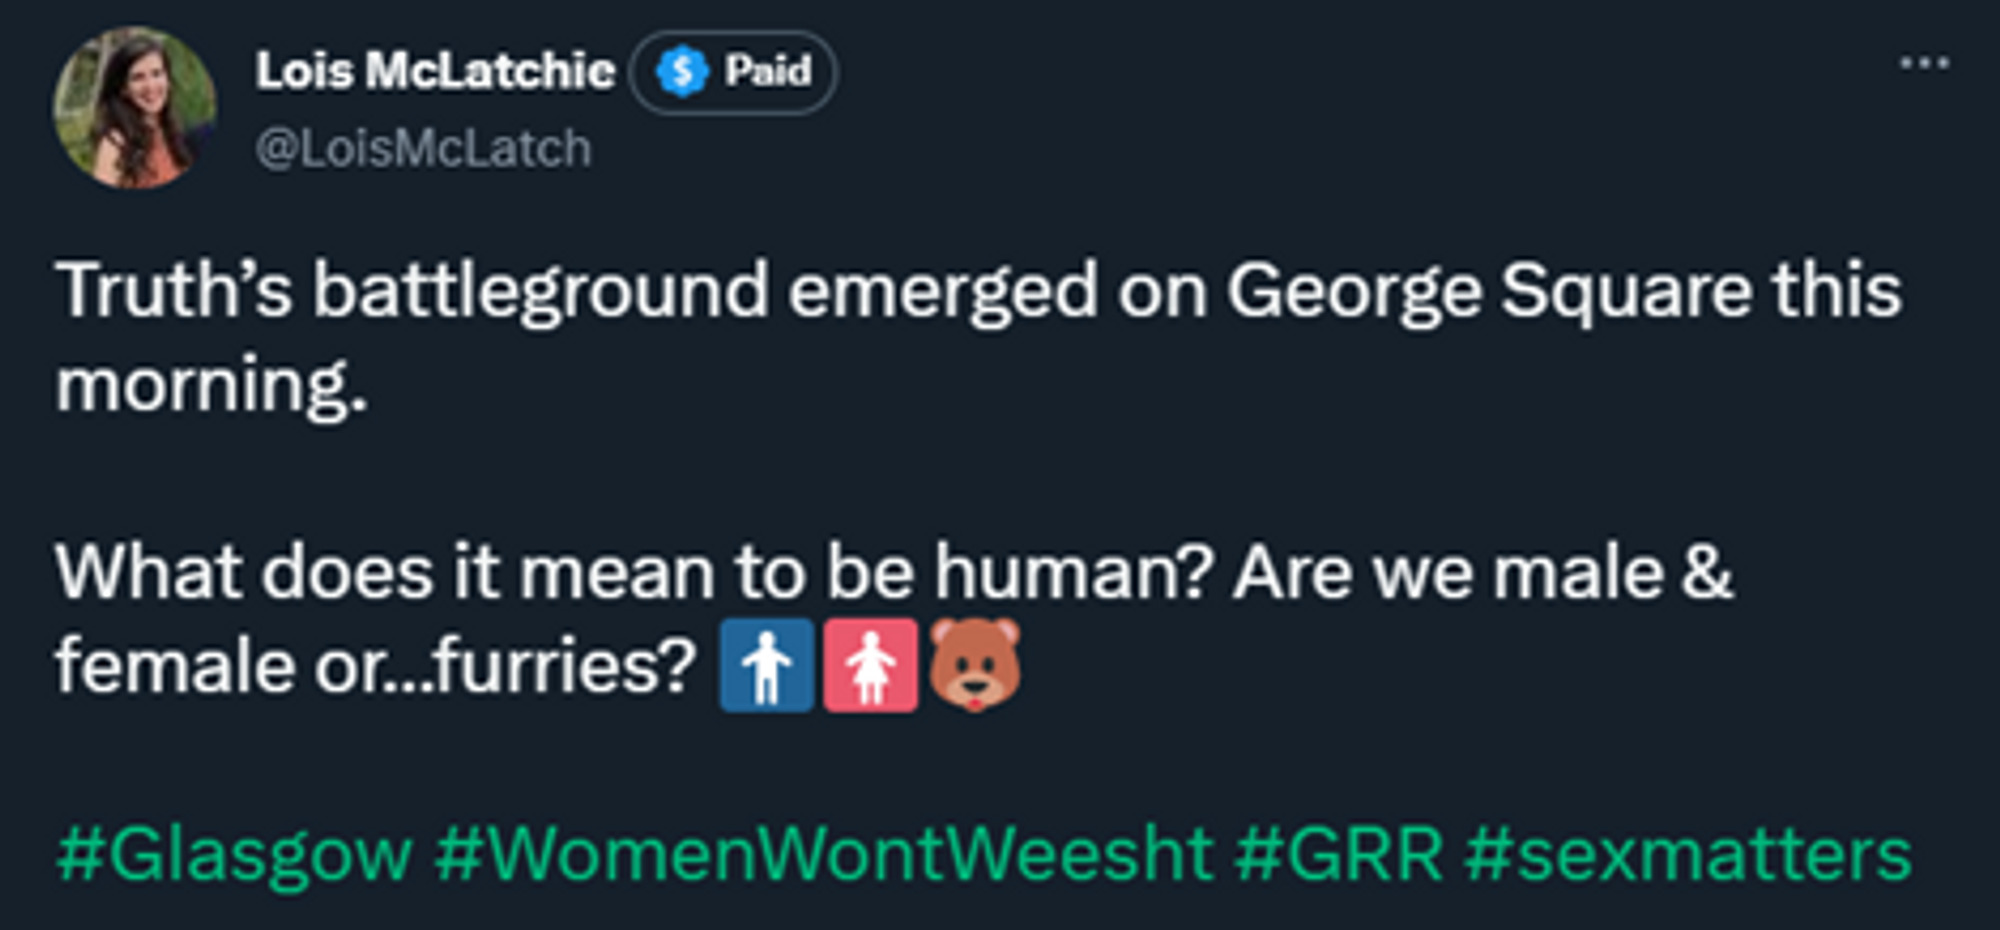 Tweet by Lois McLatchie: Truth's battleground emerged on George Square this morning. What does it mean to be human? Are we male and female or furries? #Glasgow #WomenWontWeesht #GRR #sexmatters